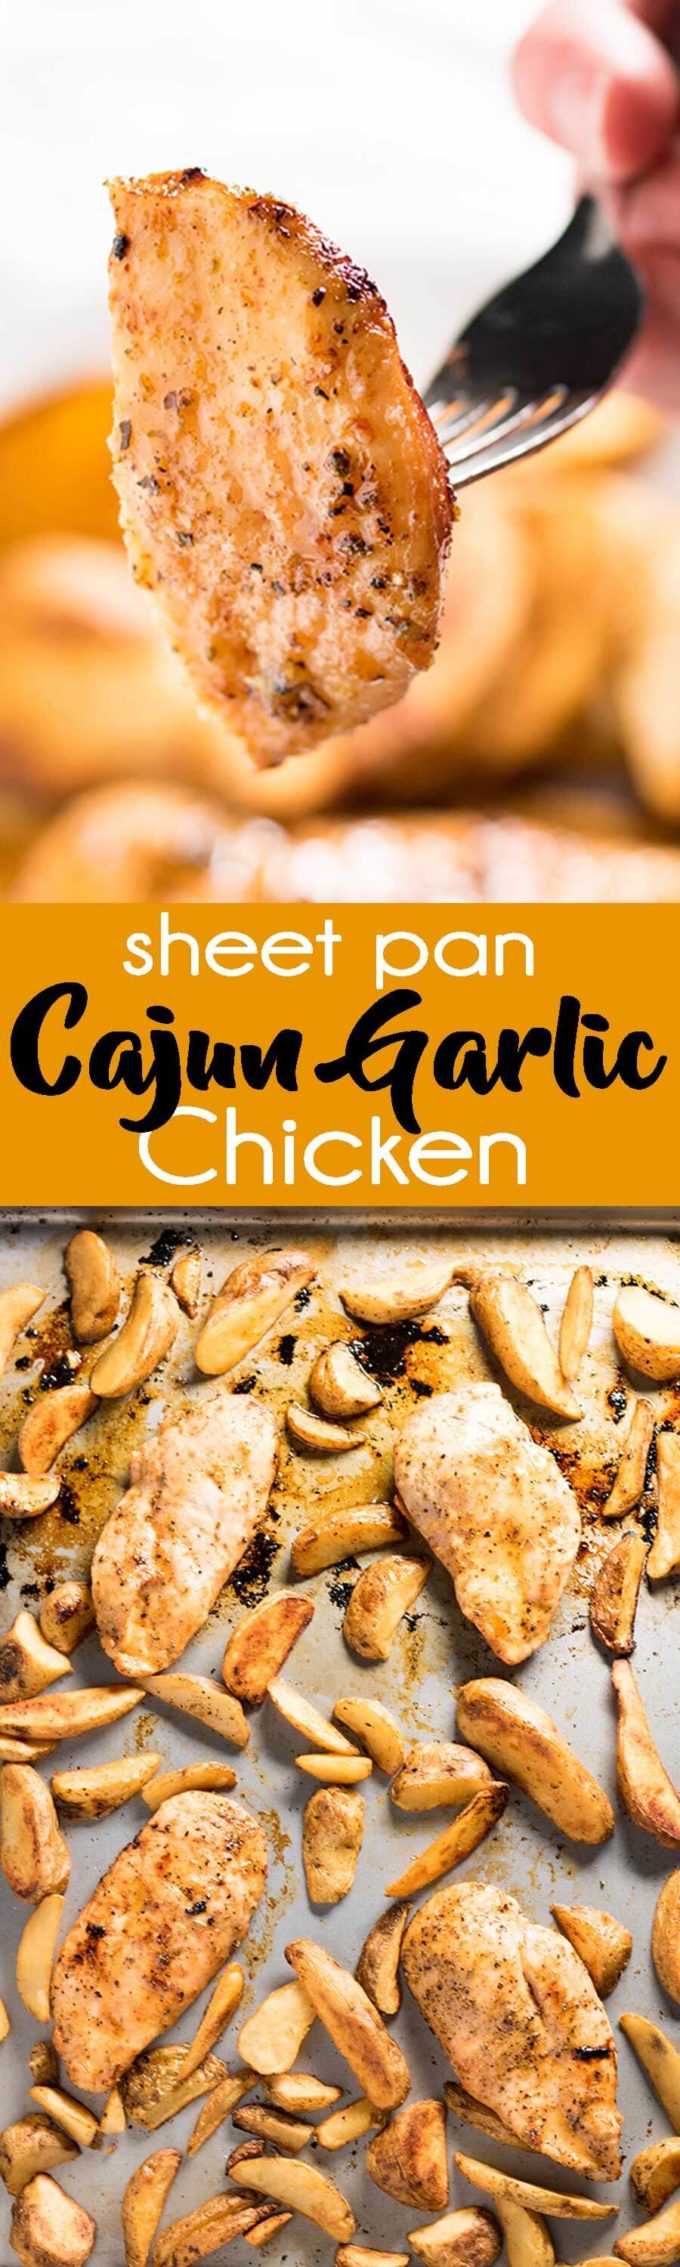  Incredibly flavorful Cajun seasoned chicken and fries makes for a super easy weeknight dinner the whole family will love! This chicken has a delicious Cajun garlic butter sauce slathered on top to keep it juicy in the oven. The seasoned fries cook right along side it on the same pan to keep clean up a breeze!